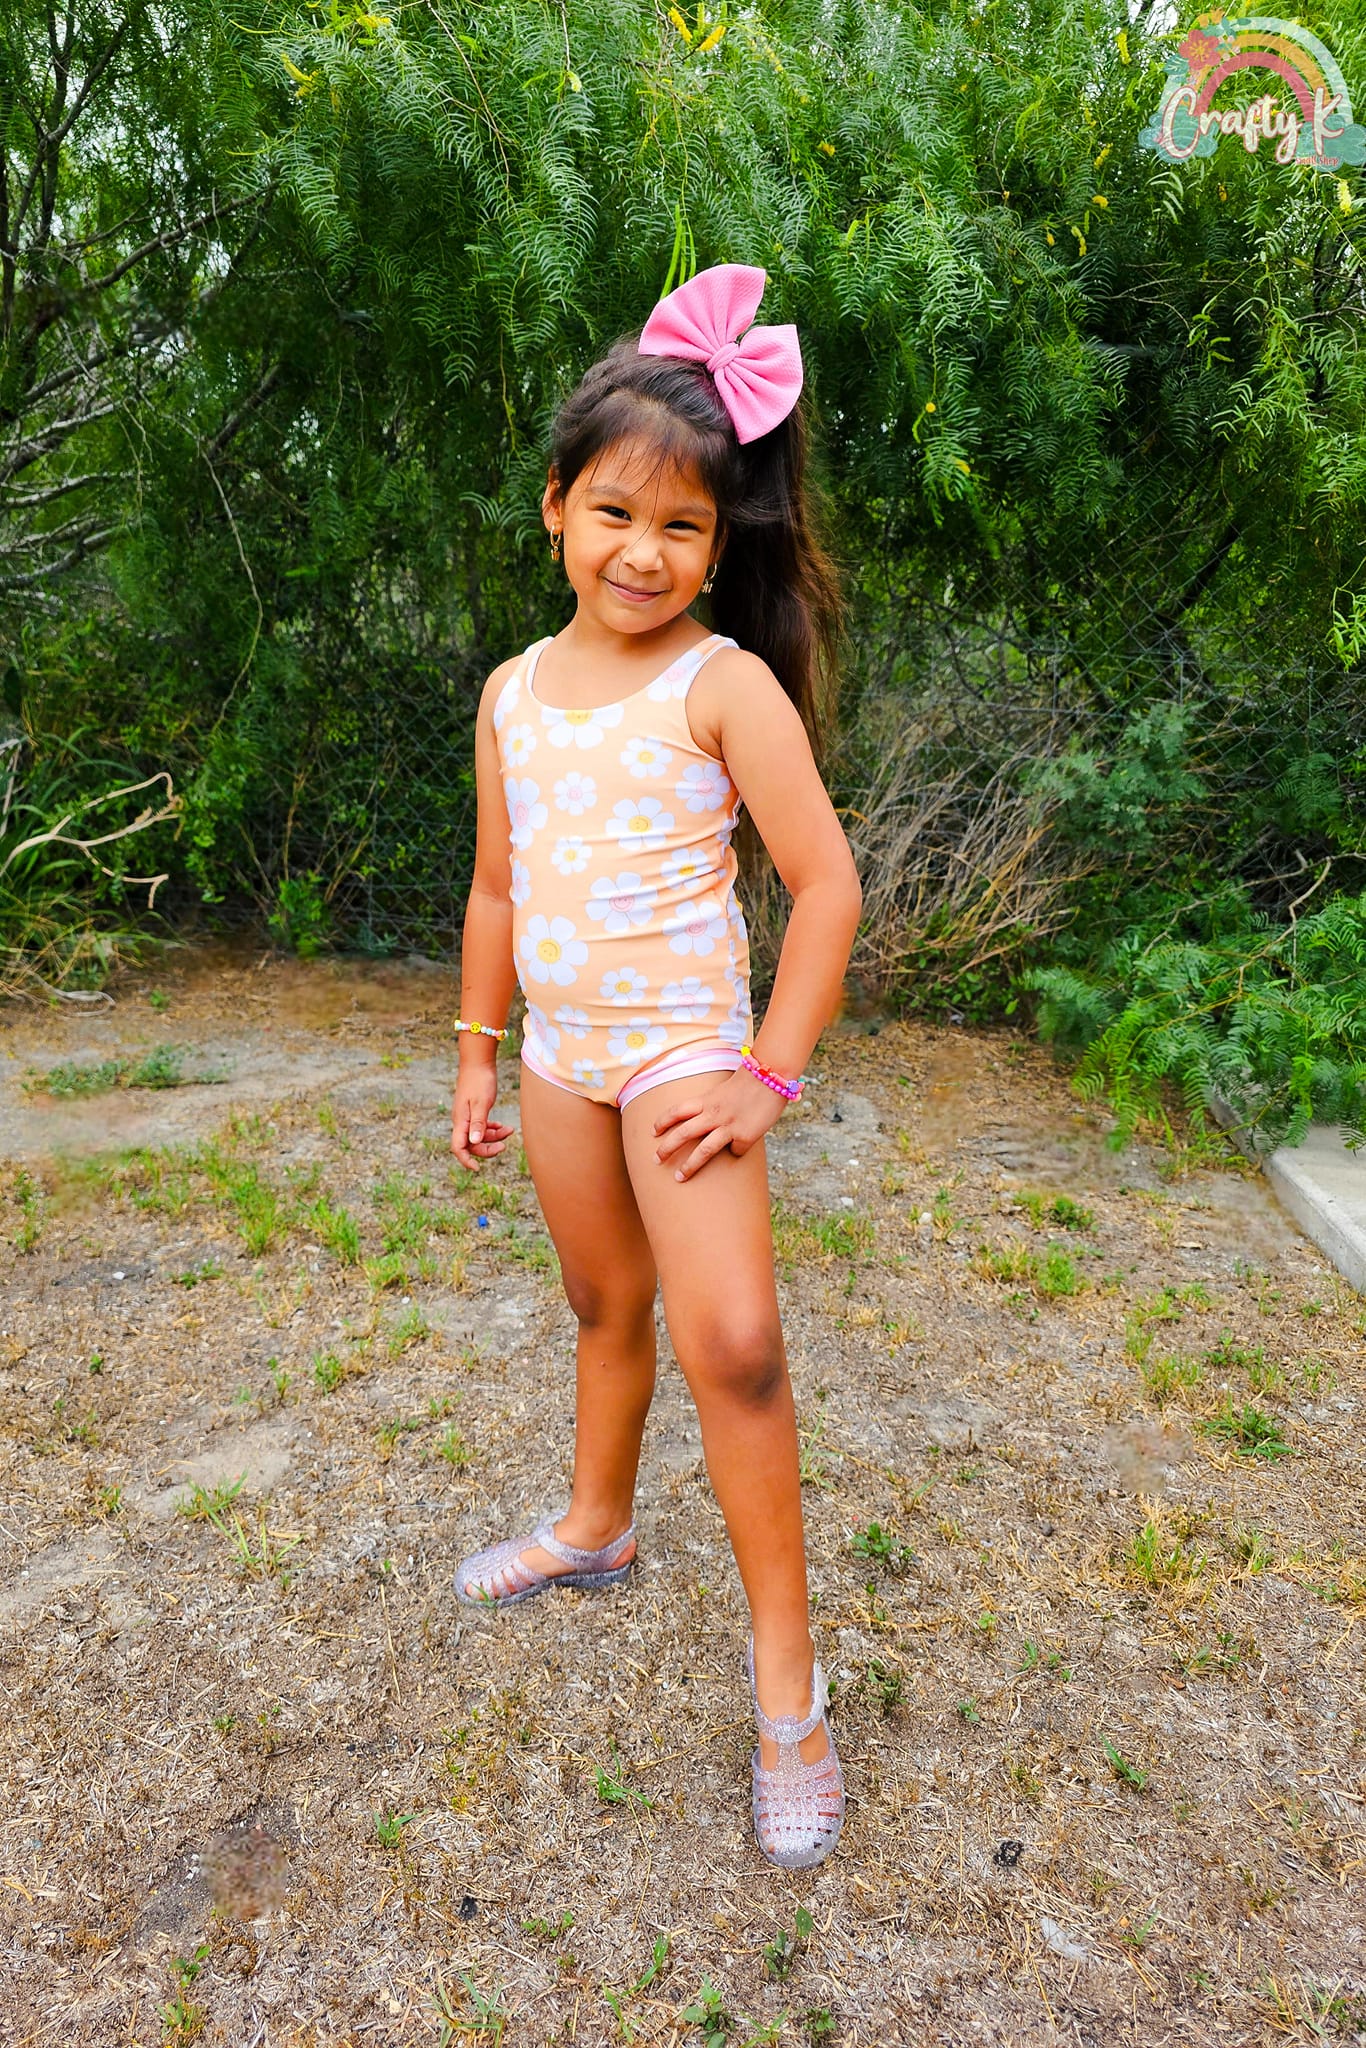 Youth Lavender Swimsuit PDF